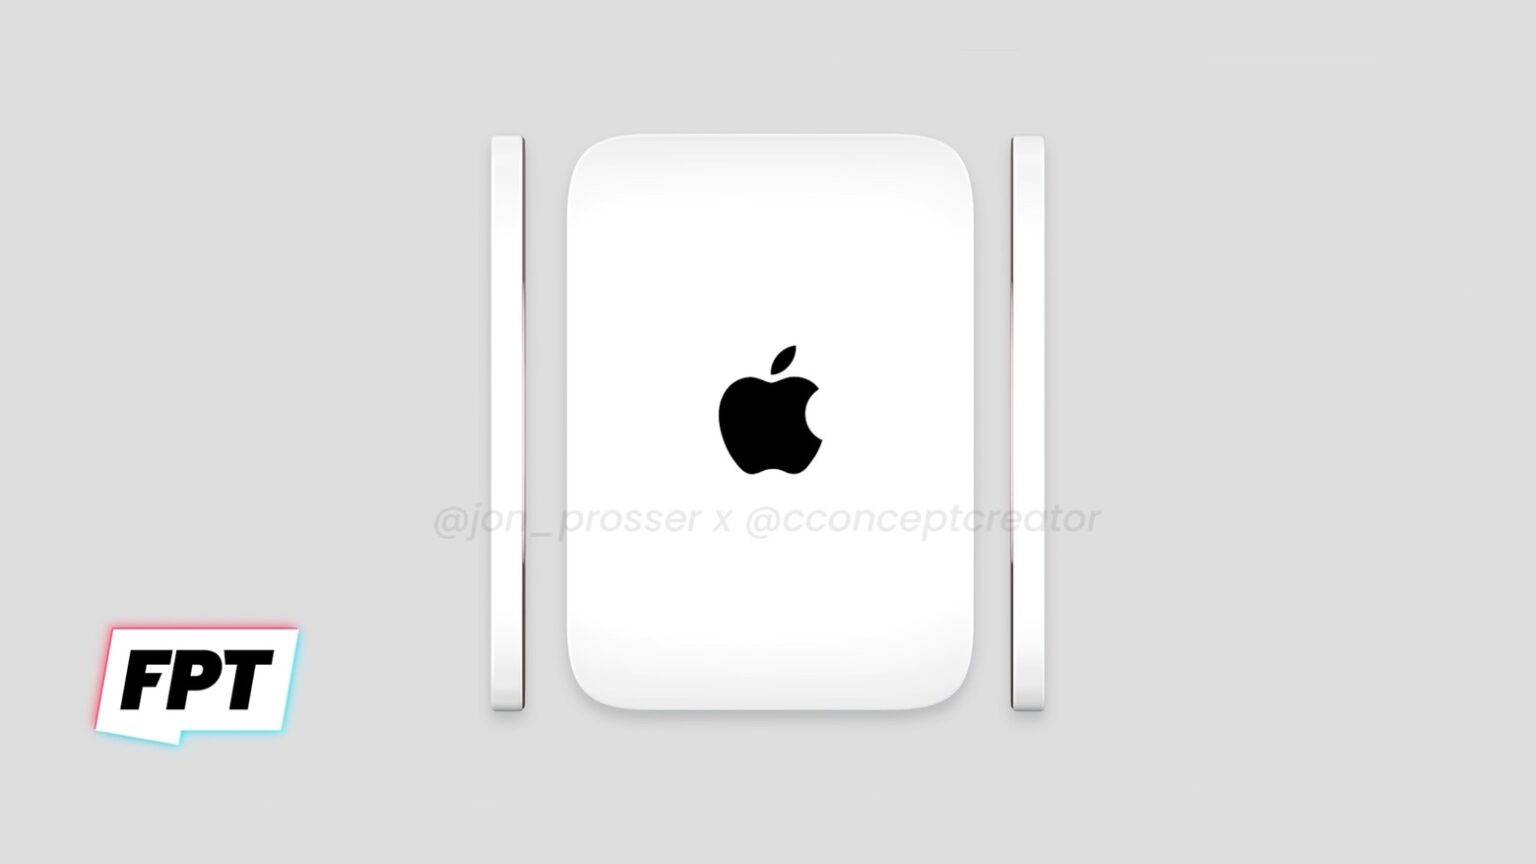 An Apple MagSafe power bank render from ‘Front Page Tech’